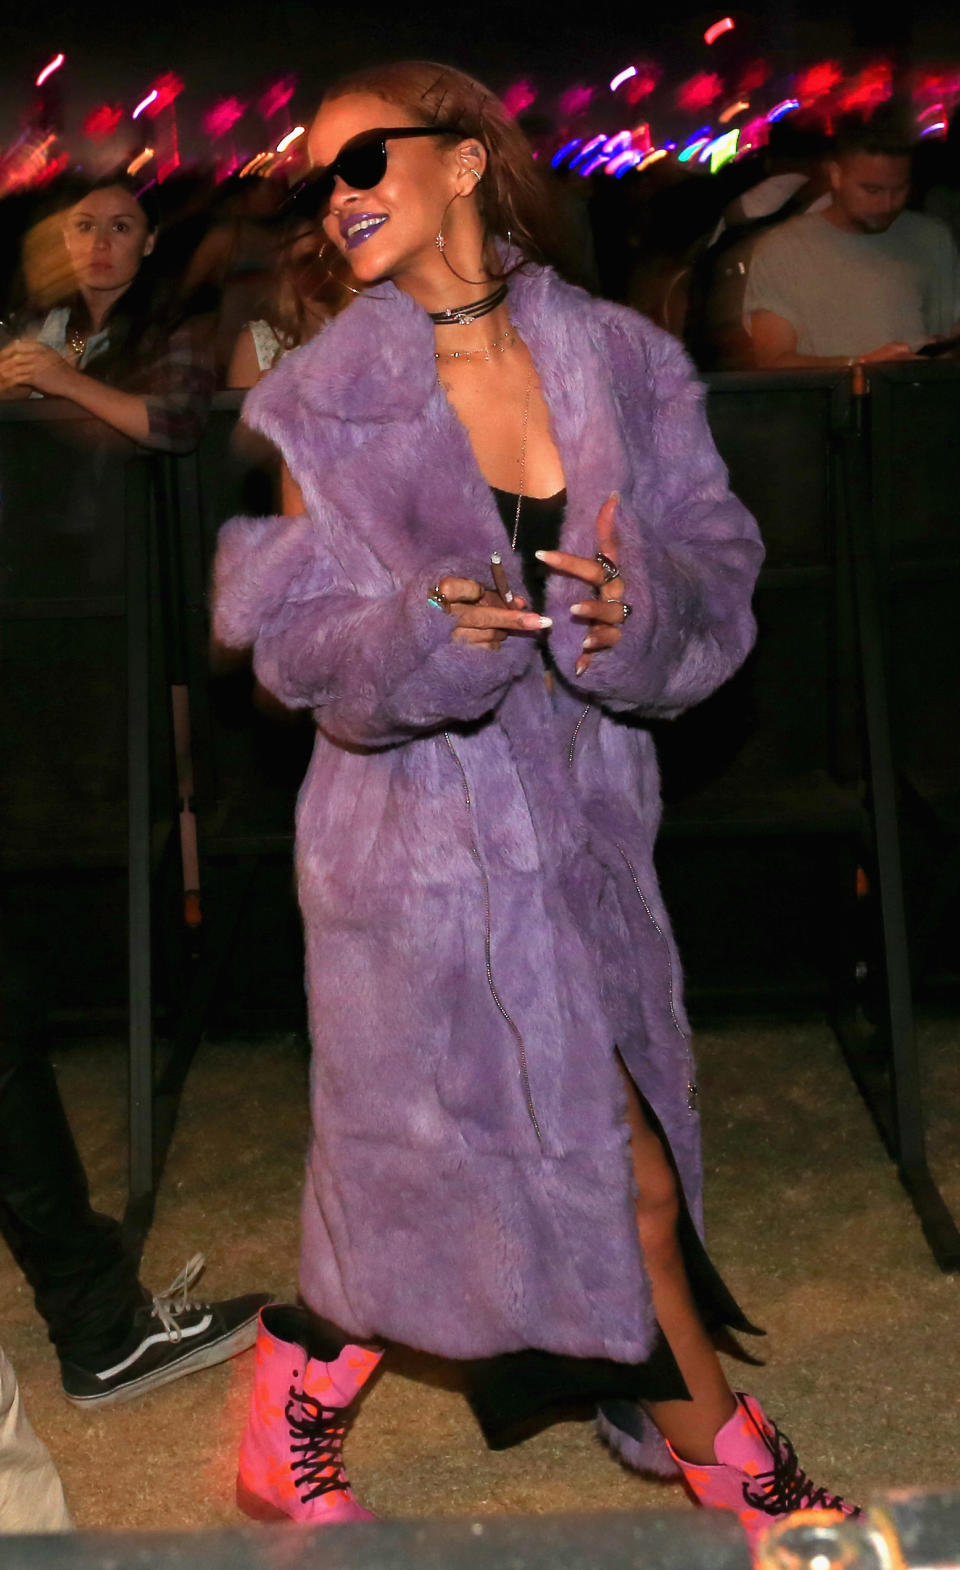 Best Coachella Fashion Looks | Singer Rihanna attends day 2 of the 2015 Coachella Valley Music & Arts Festival (Weekend 1) at the Empire Polo Club on April 11, 2015 in Indio, California